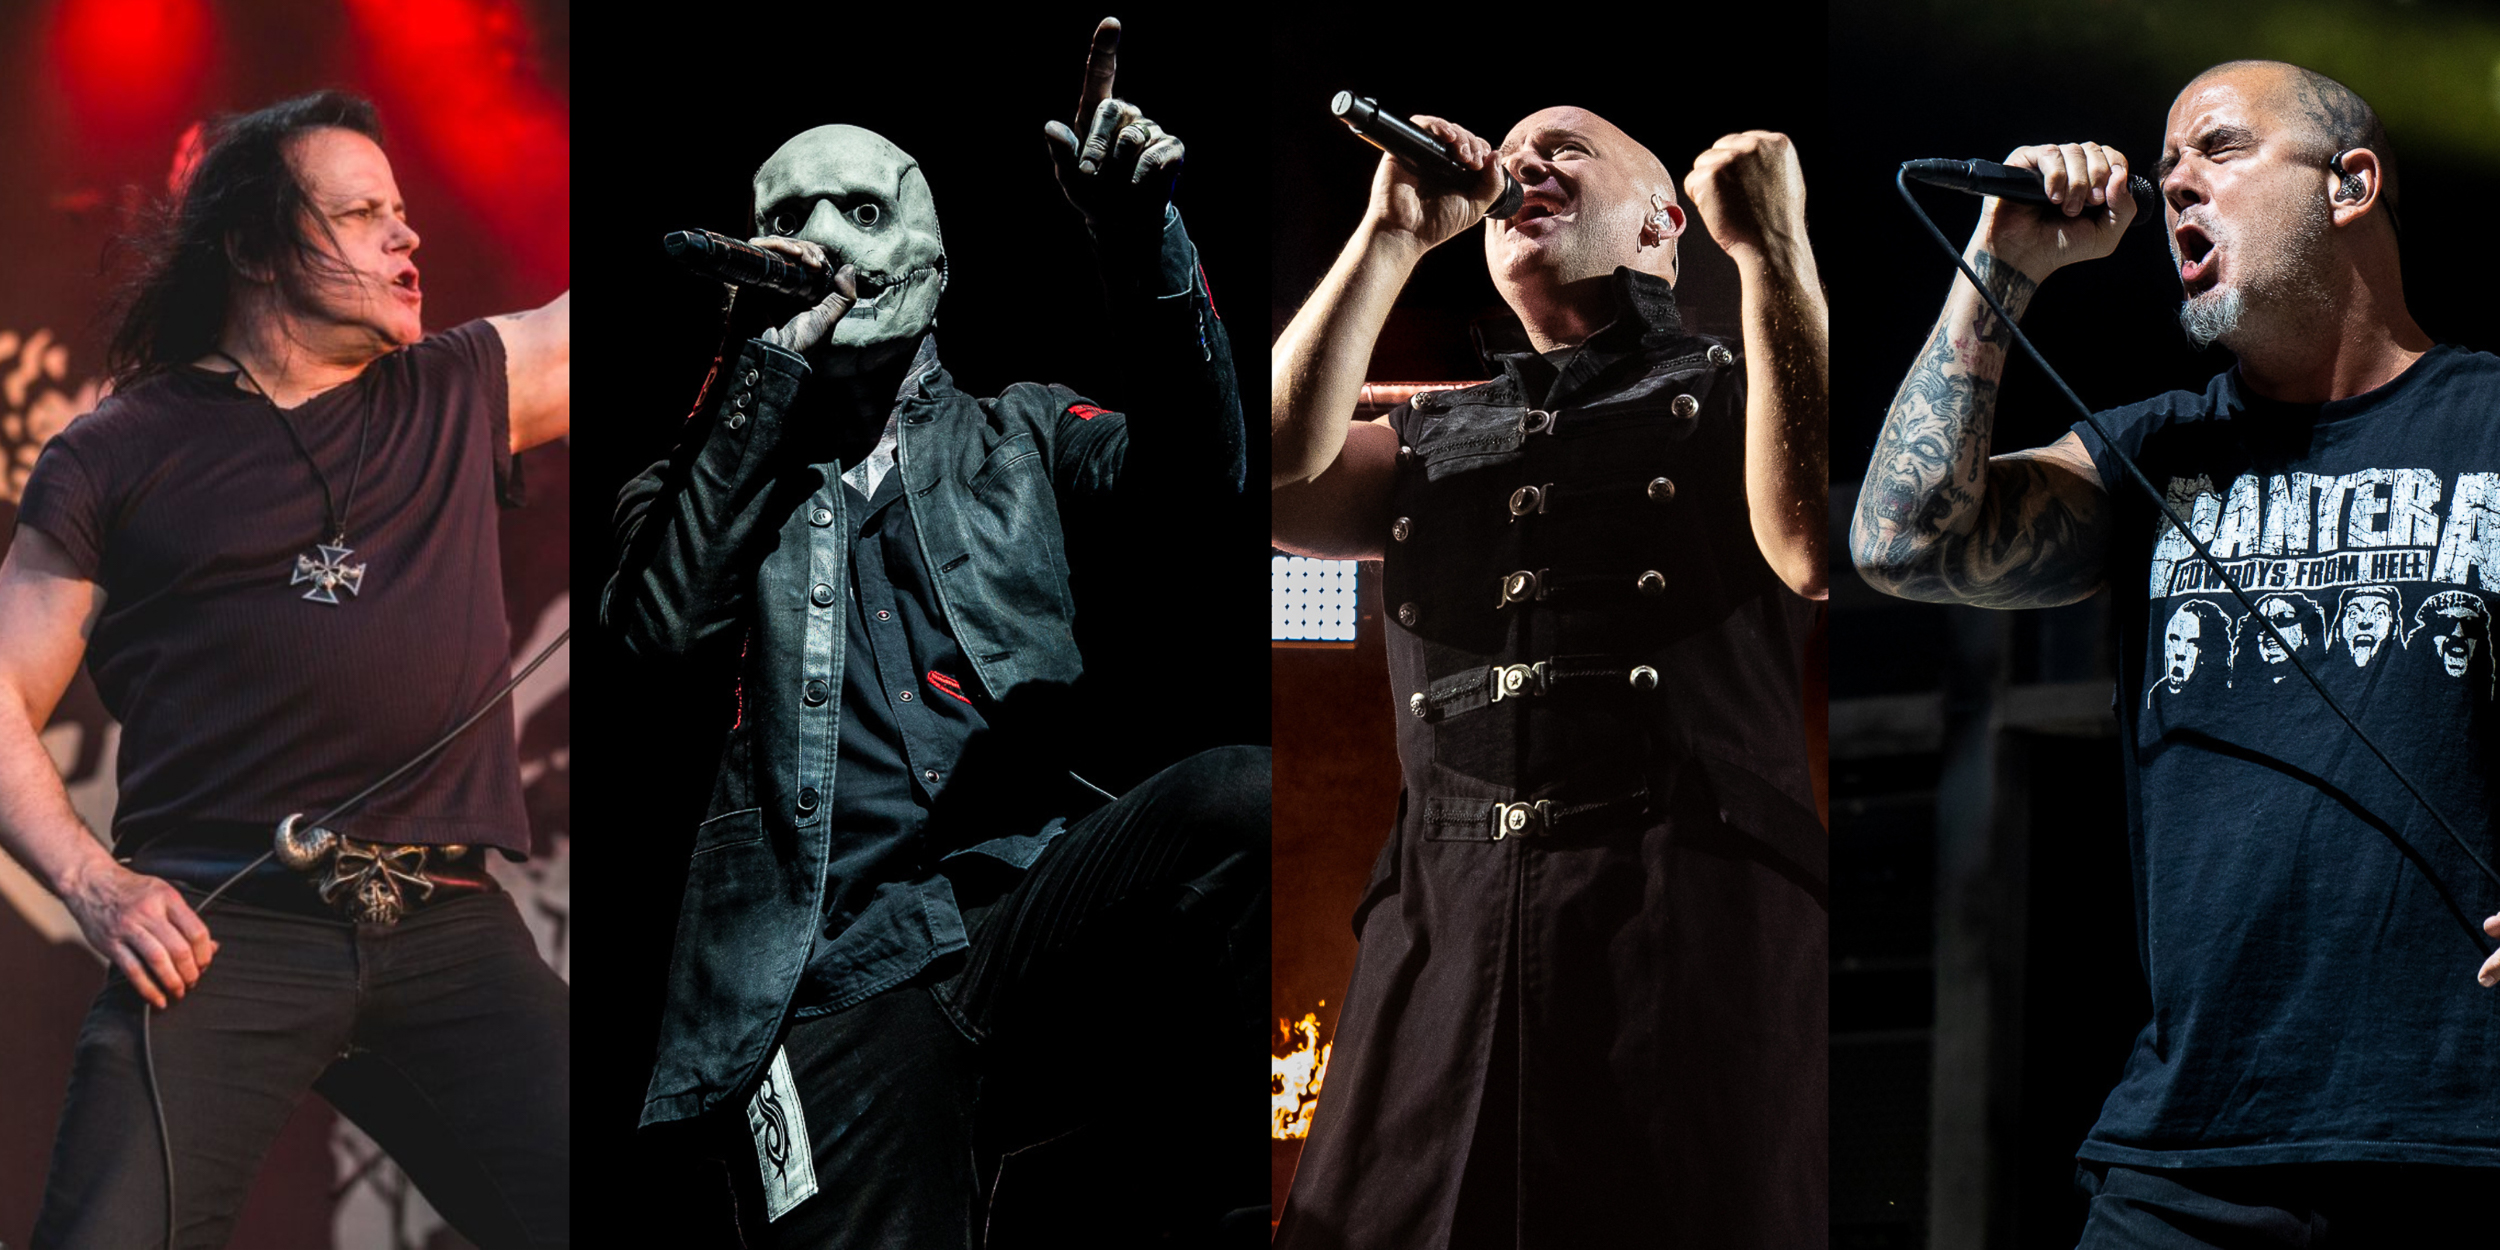 Sonic Temple 2024 Lineup Announced Misfits, Slipnot, Disturbed, and More